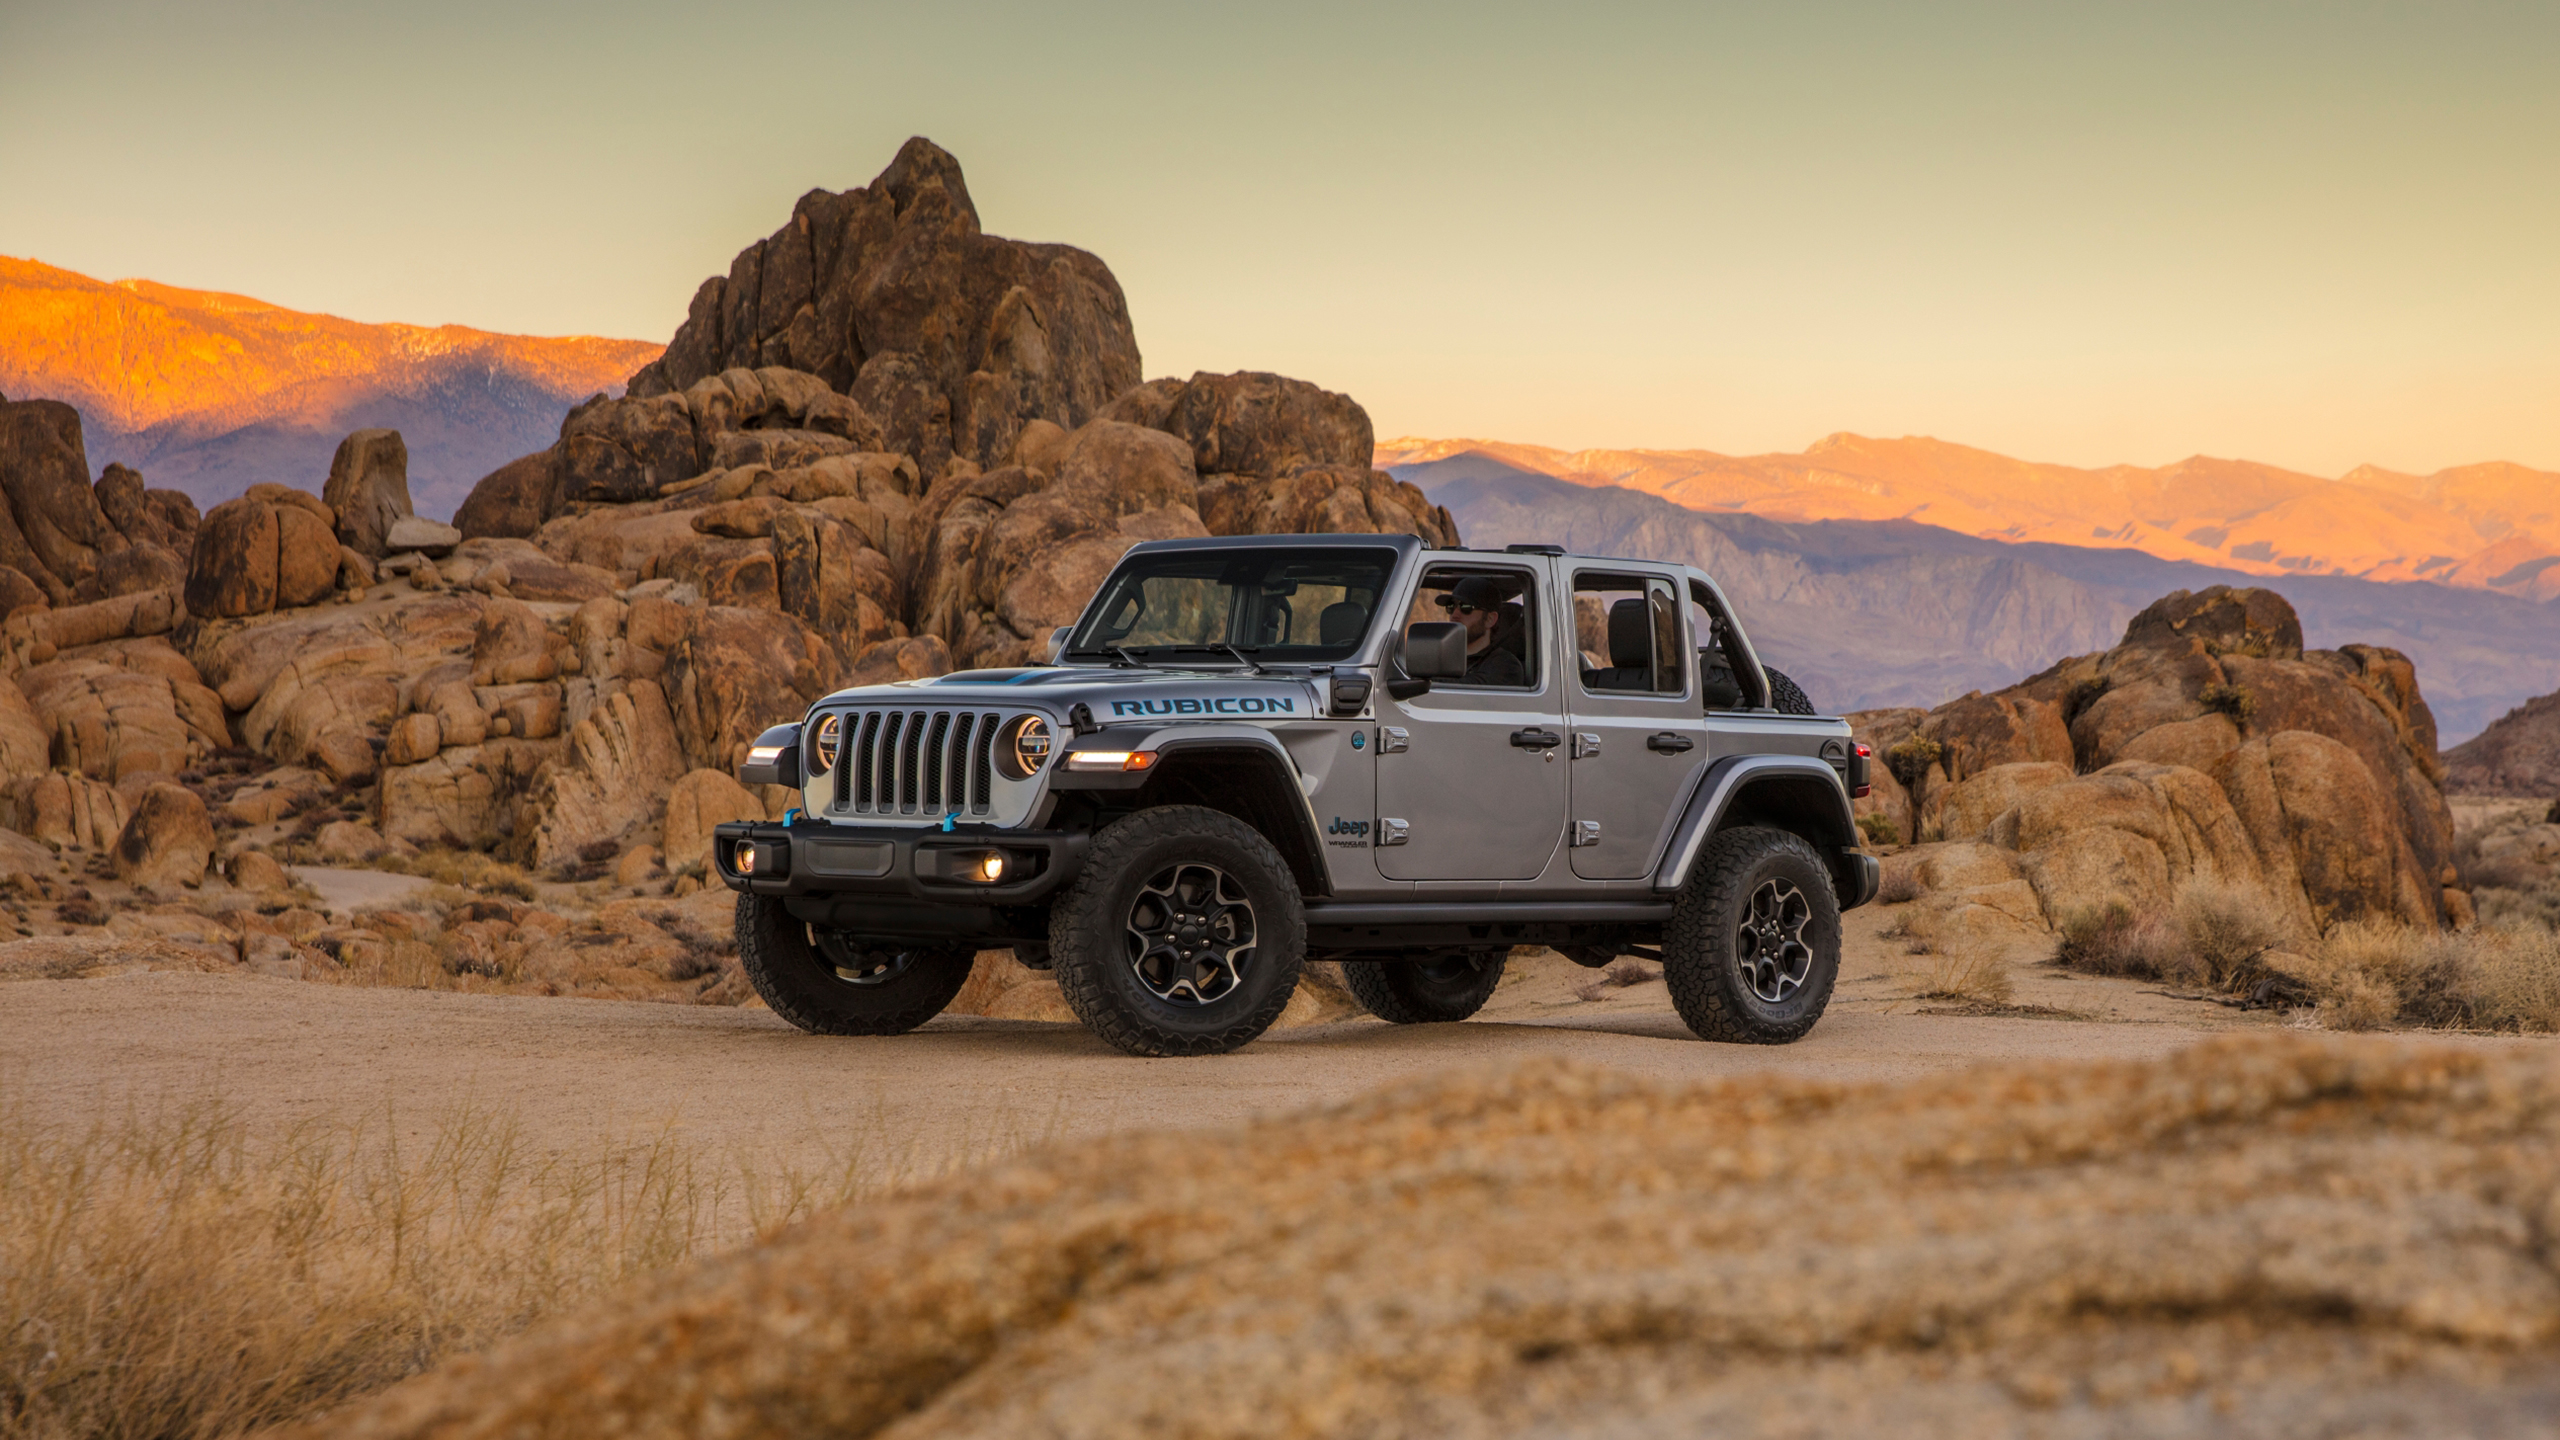 2021 Jeep Wrangler Unlimited Rubicon 4xe Wallpaper Hd Car Wallpapers Id 15629